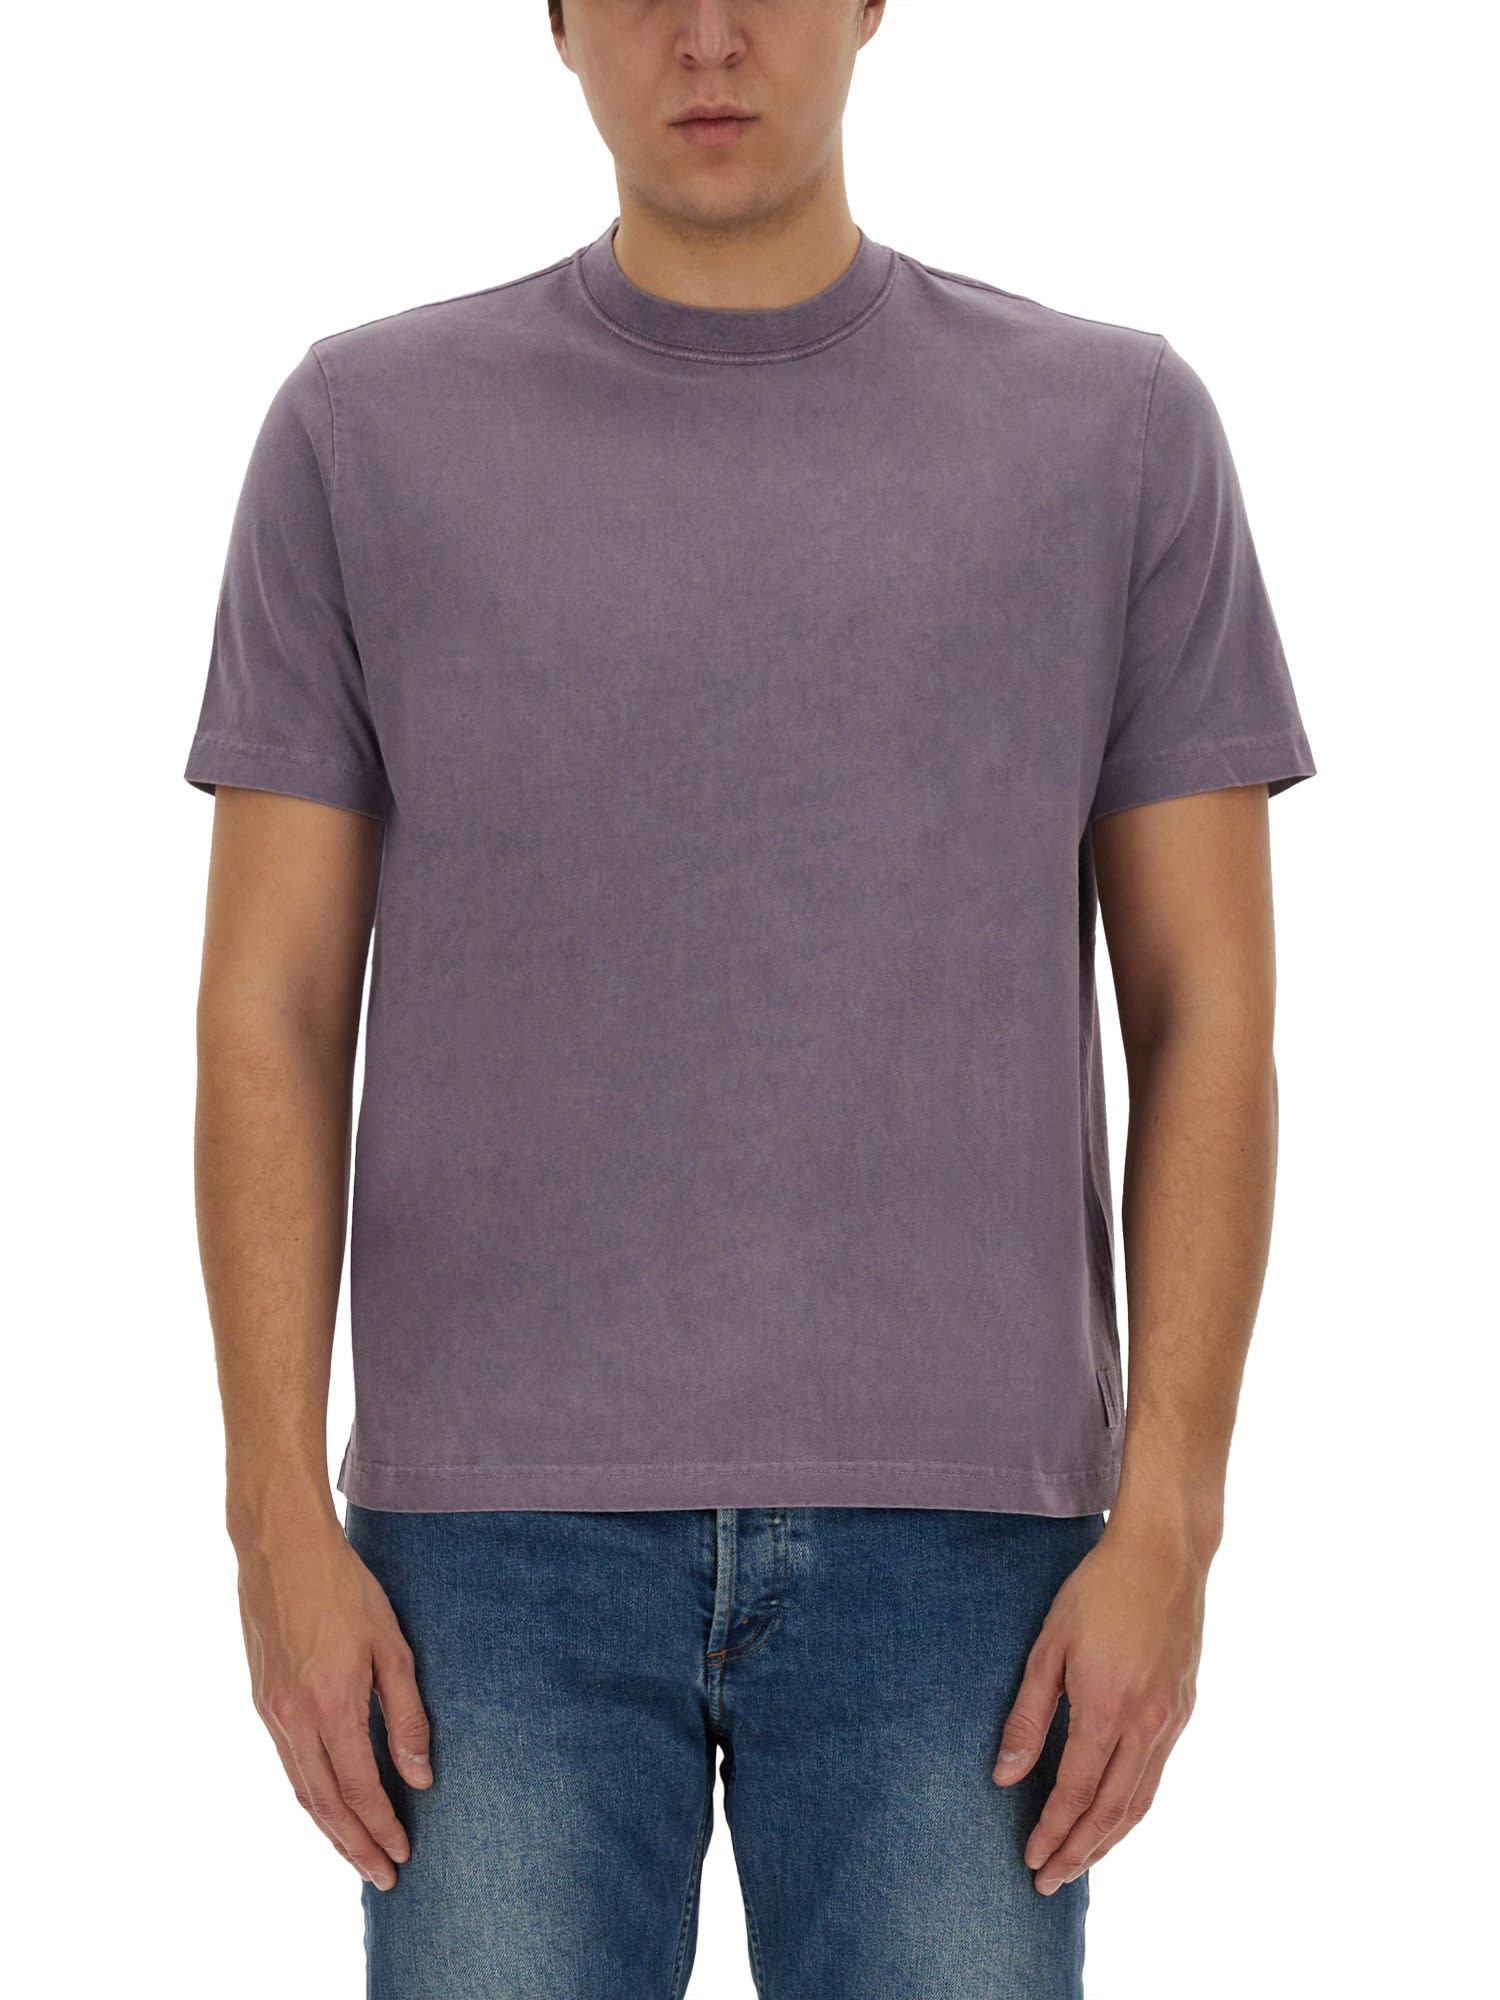 PS BY PAUL SMITH T-SHIRT WITH LOGO